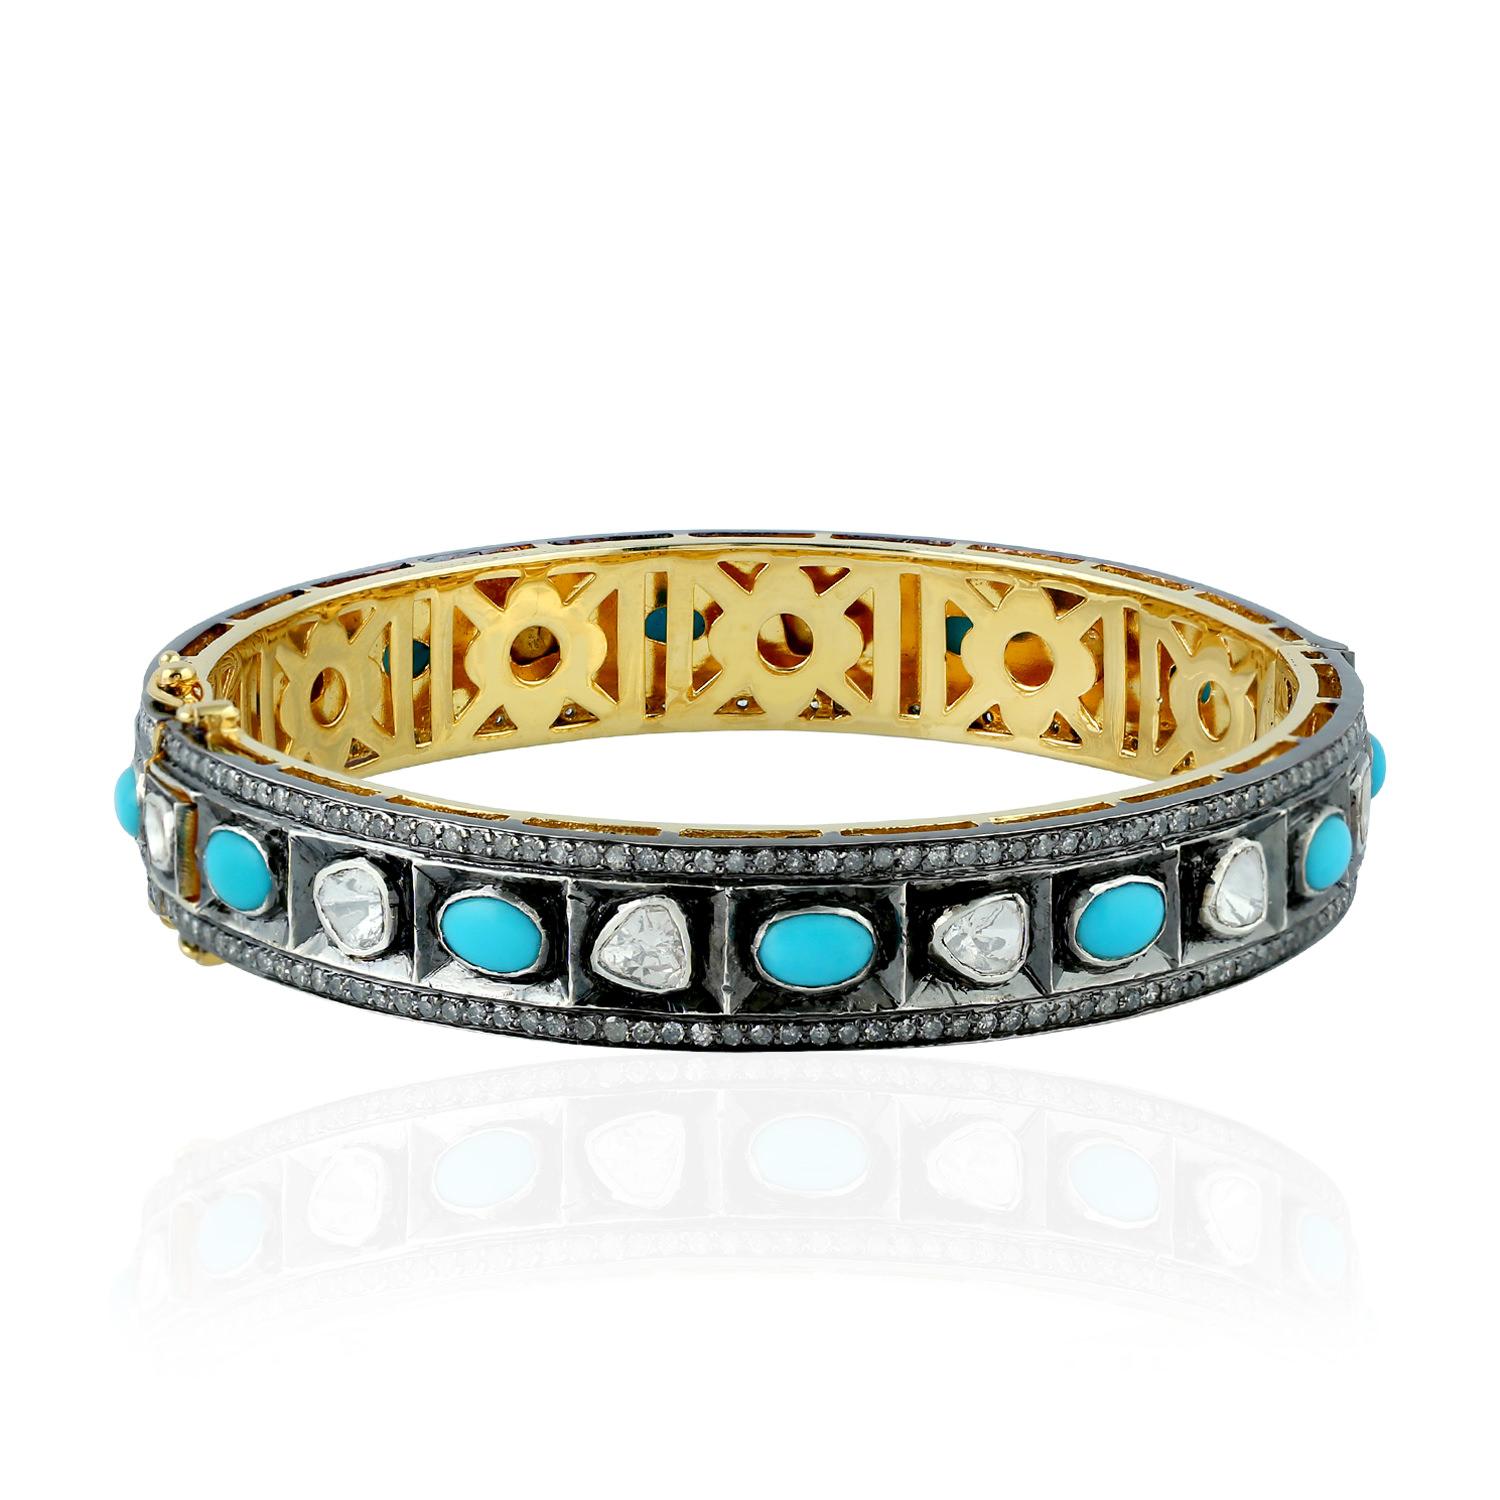 A stunning bracelet handmade in 18K gold & sterling silver with blackened finish. It is set in 3.62 carats turquoise & 2.62 carats rosecut diamonds. Clasp Closure

FOLLOW  MEGHNA JEWELS storefront to view the latest collection & exclusive pieces. 